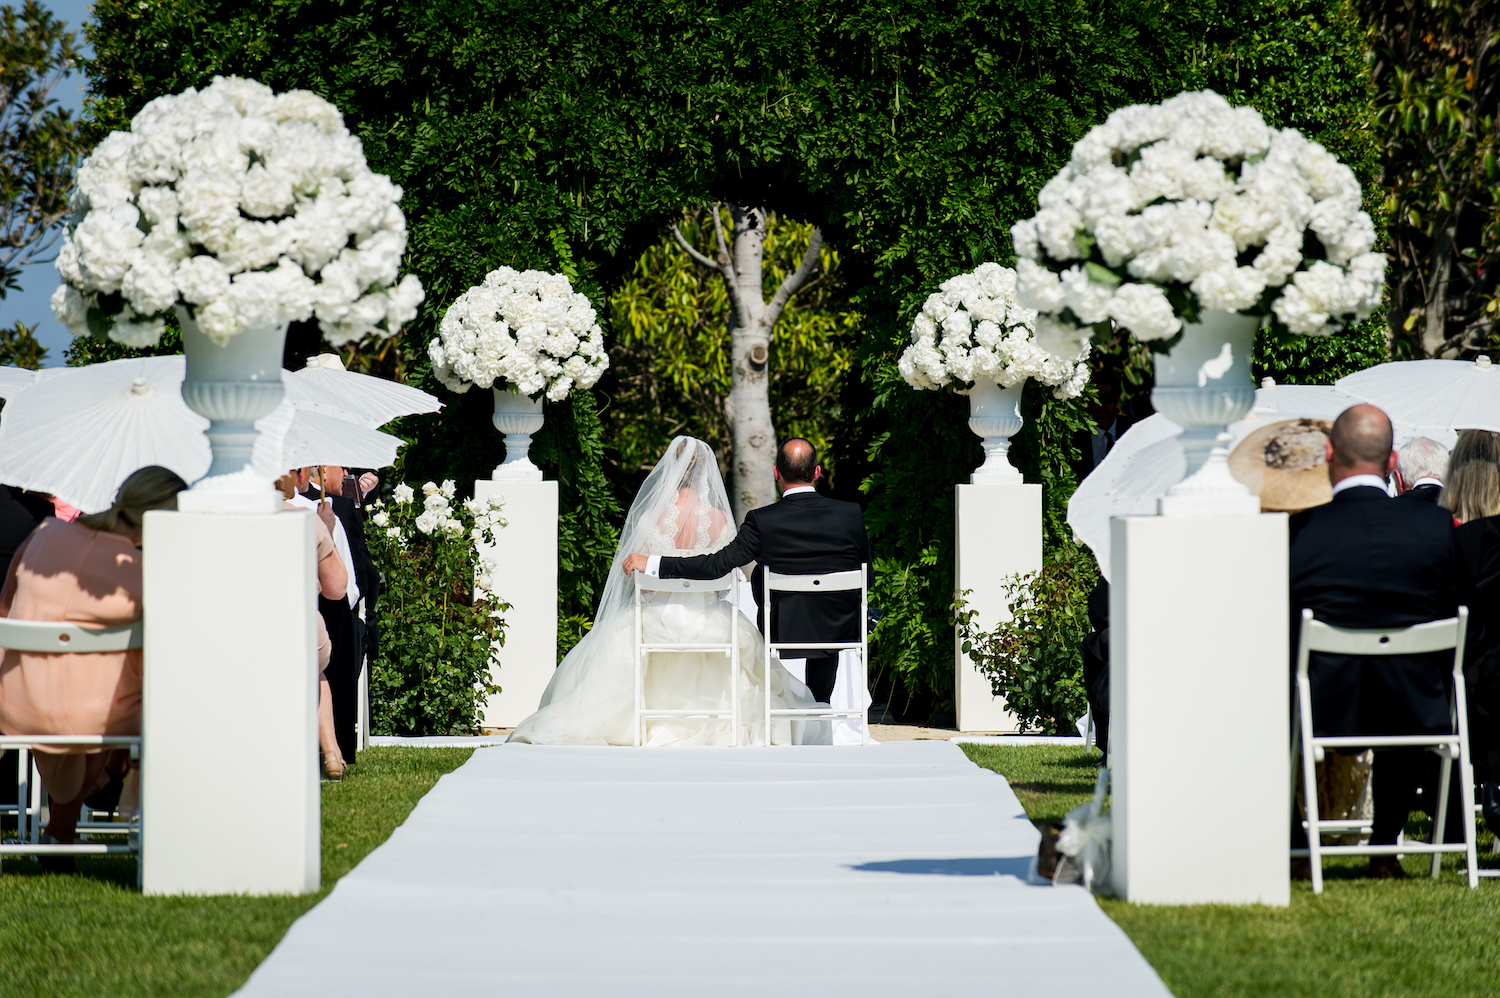 Questions to Ask Before You Hire a Wedding Supplier